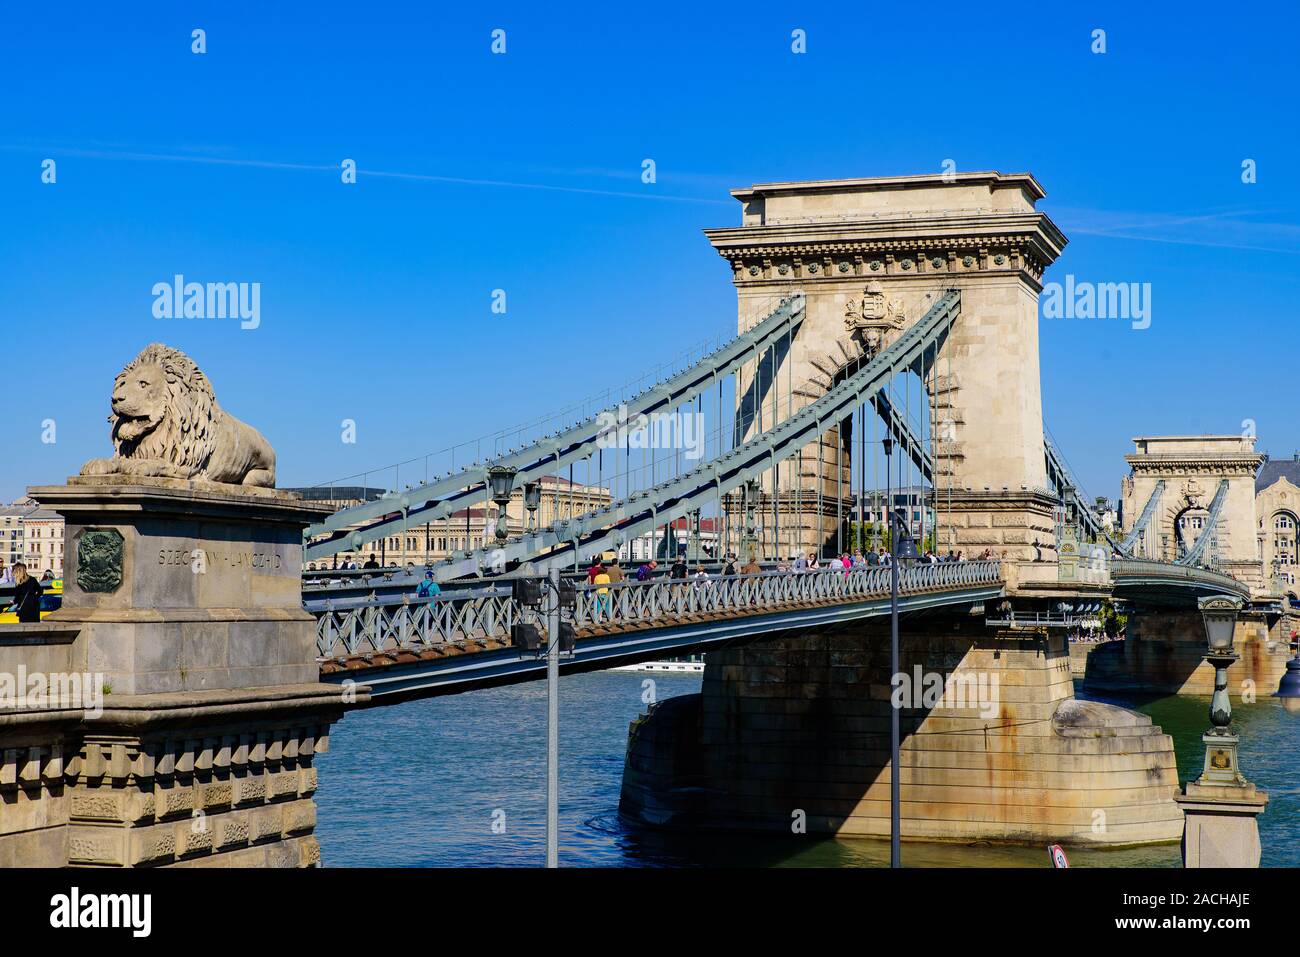 Széchenyi Chain Bridge across the River Danube connecting Buda and Pest, Budapest, Hungary Stock Photo